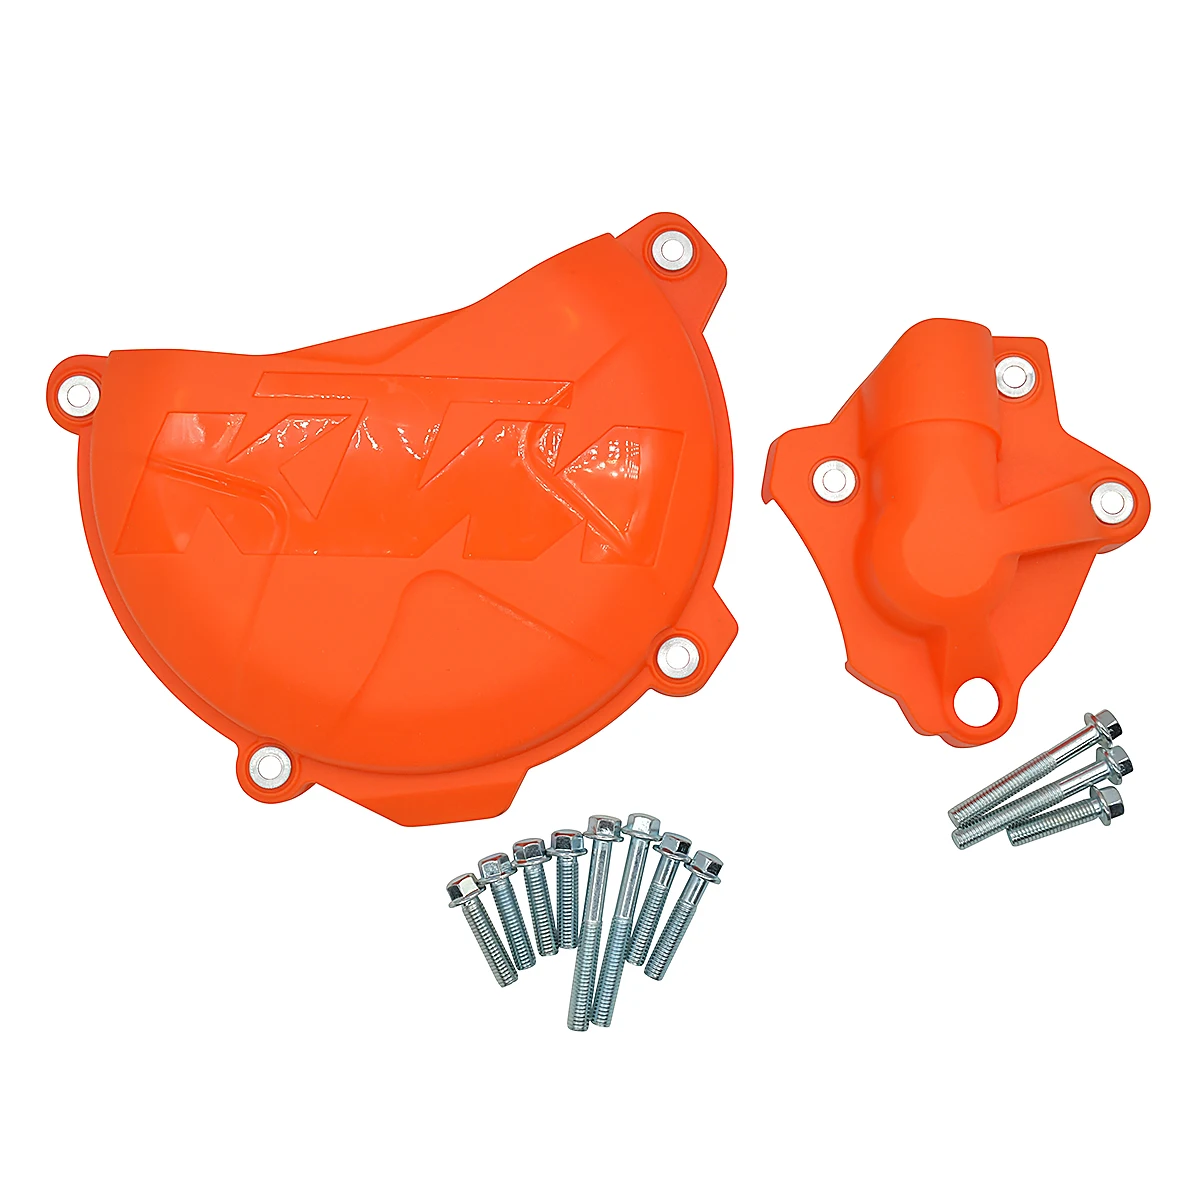 

Clutch Protector Guard Water Pump Cover For KTM 250 350 SX-F EXC-F XC-F XCF-W SIX DAYS FREERIDE 2012-2016 Enduro Dirt Pit Bike